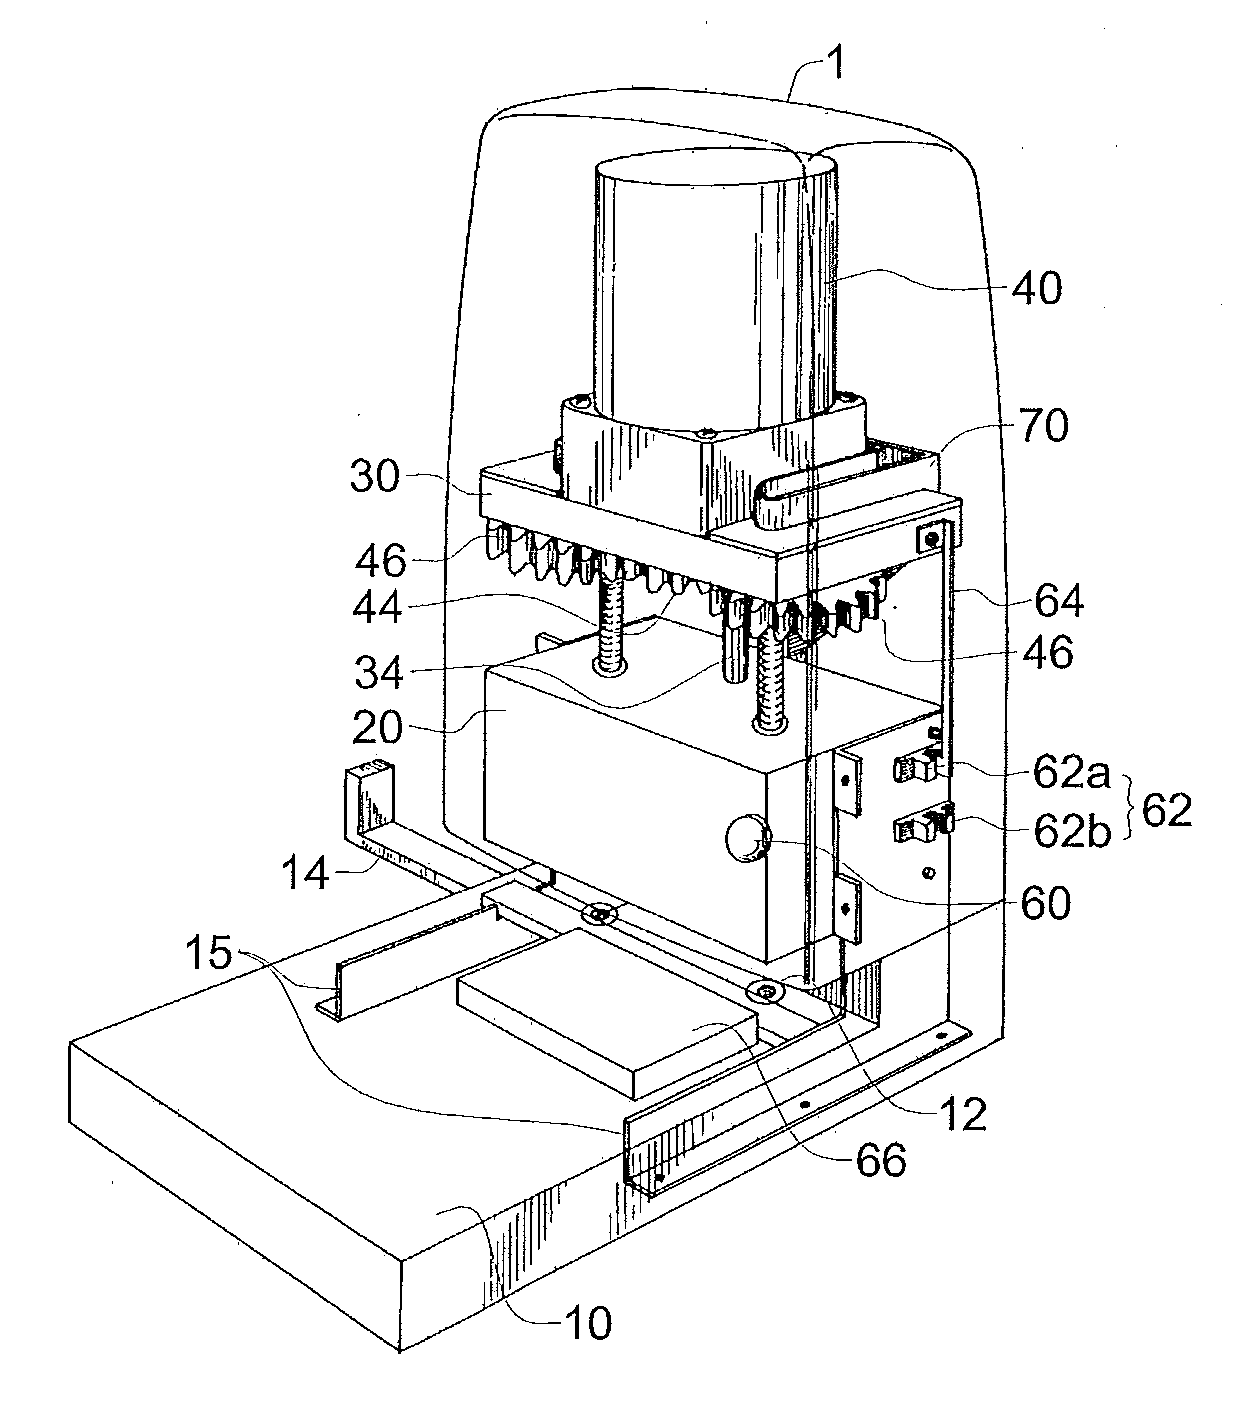 Automatic electric punching apparatus